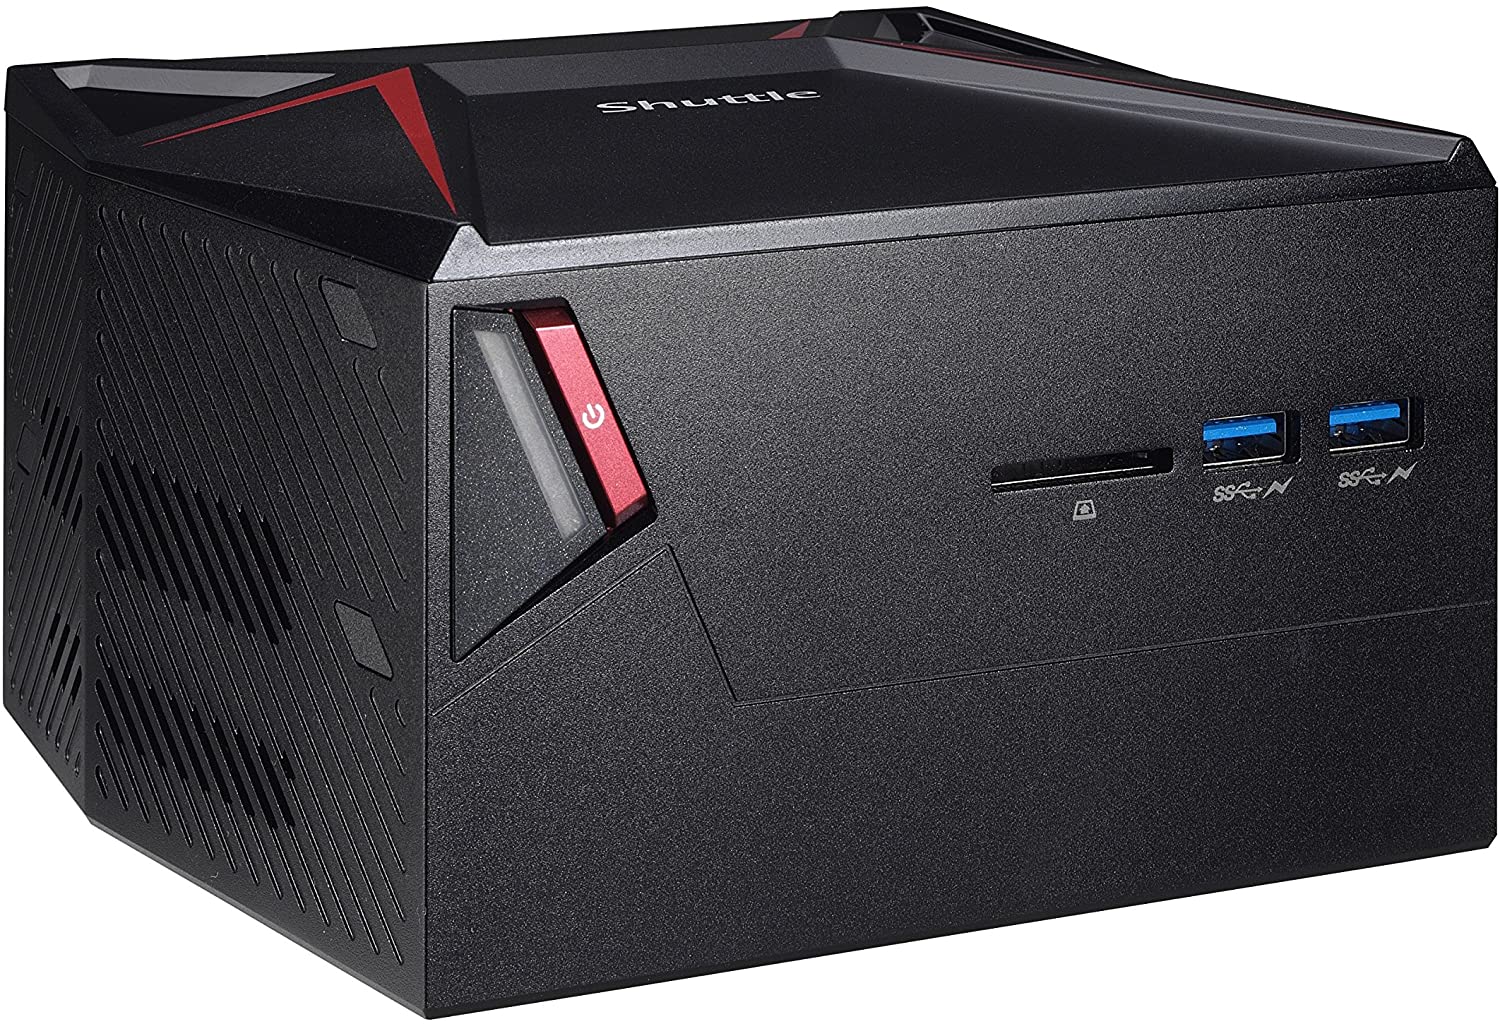 Shuttle X1 Gaming PC Specifications Manual